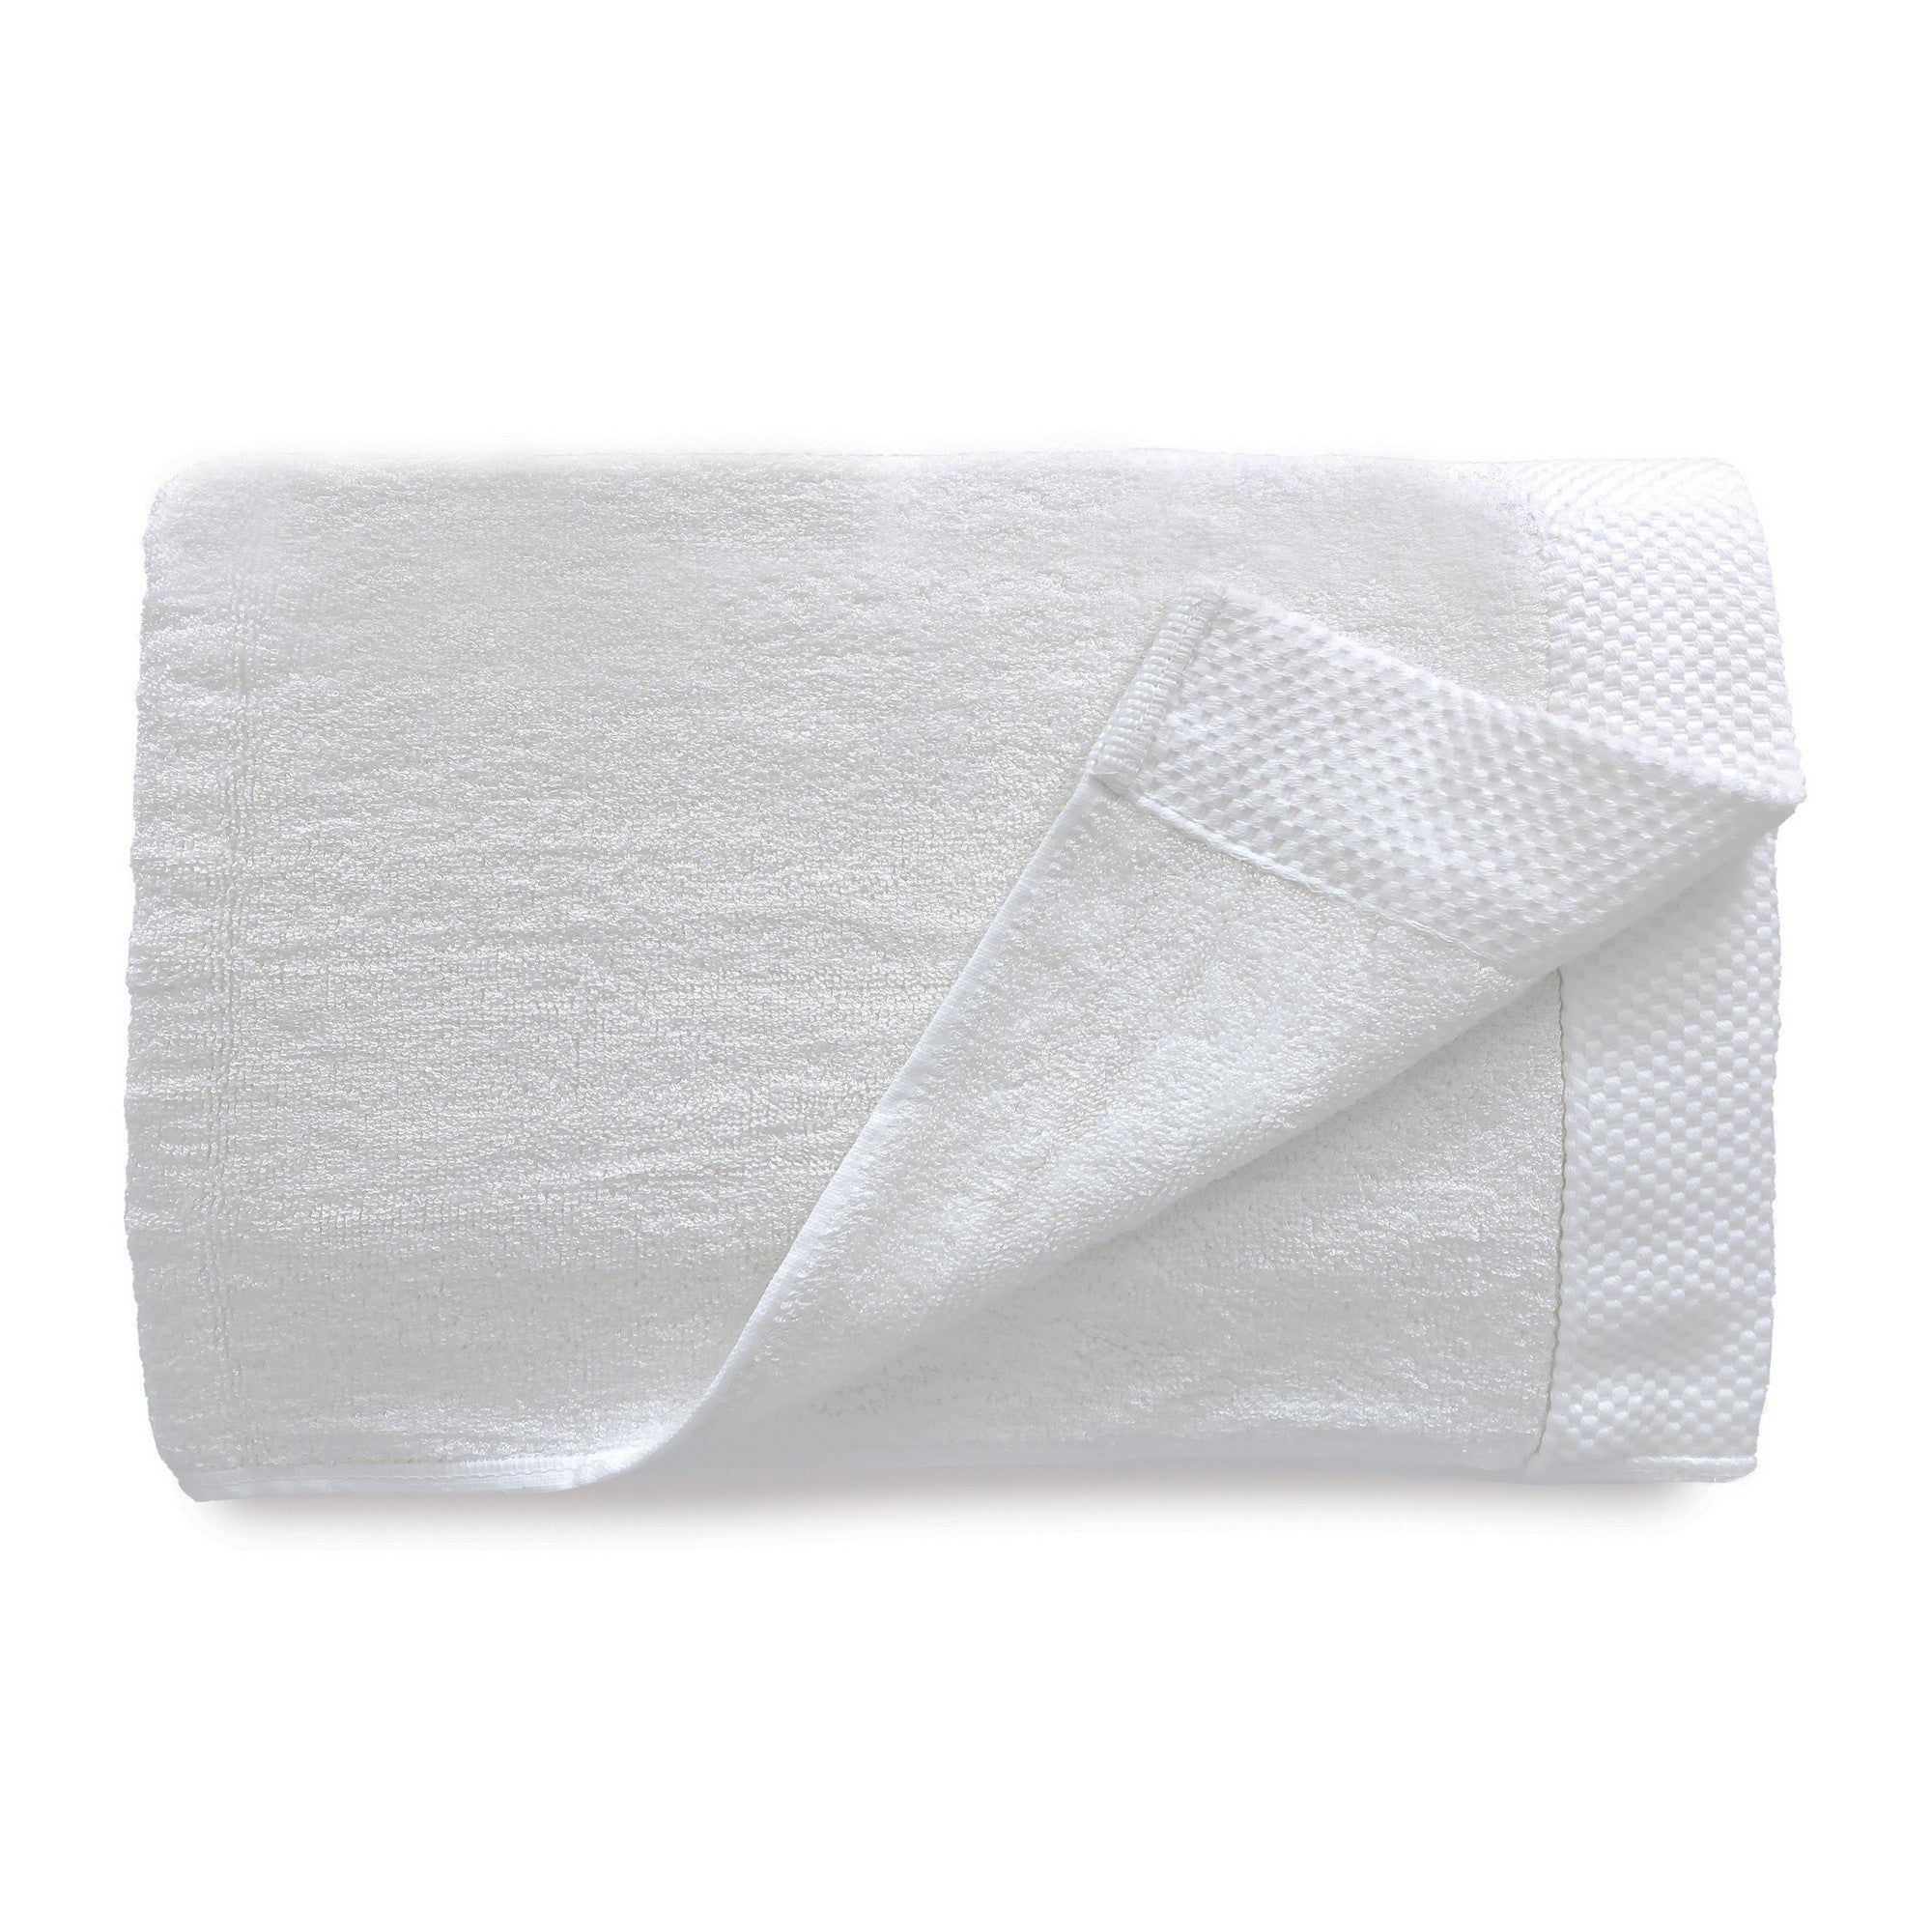 Luxury BAMBOO Bath Towel - Incredibly Soft, Hypoallergenic and Extra Gentle on Sensitive Skin and Hair - White